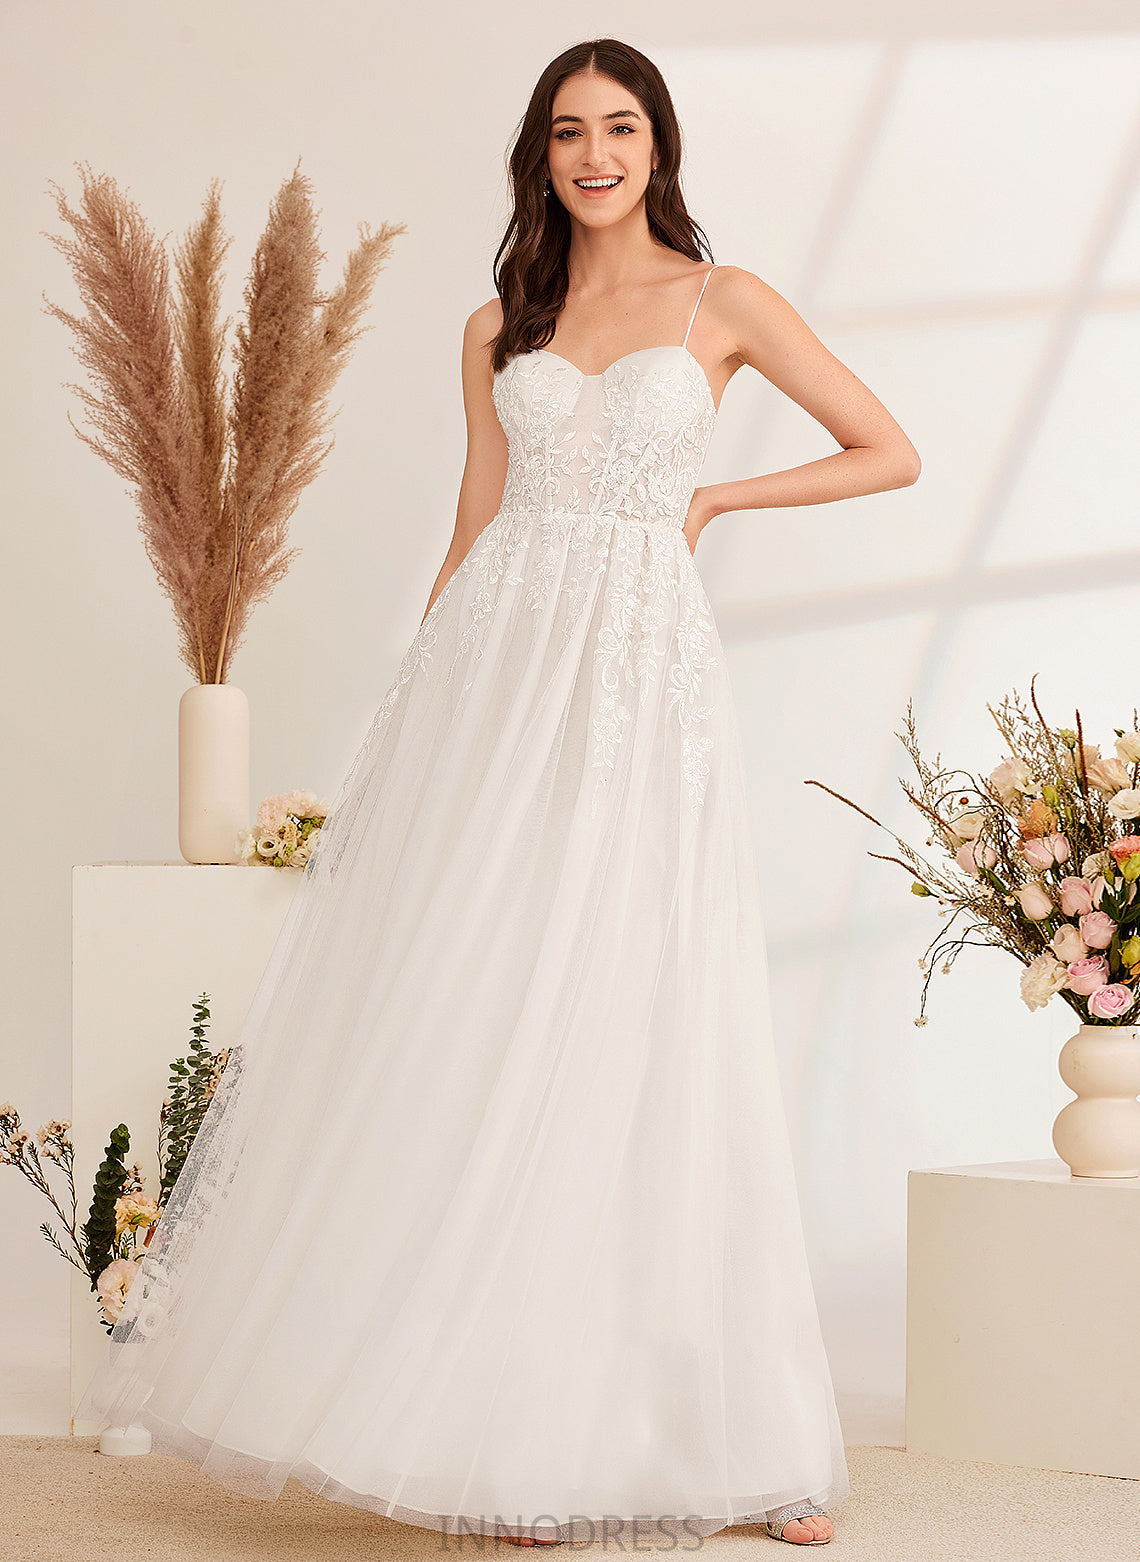 A-Line Wedding Dresses Wedding With Meadow Split Front Sweetheart Sequins Dress Floor-Length Beading